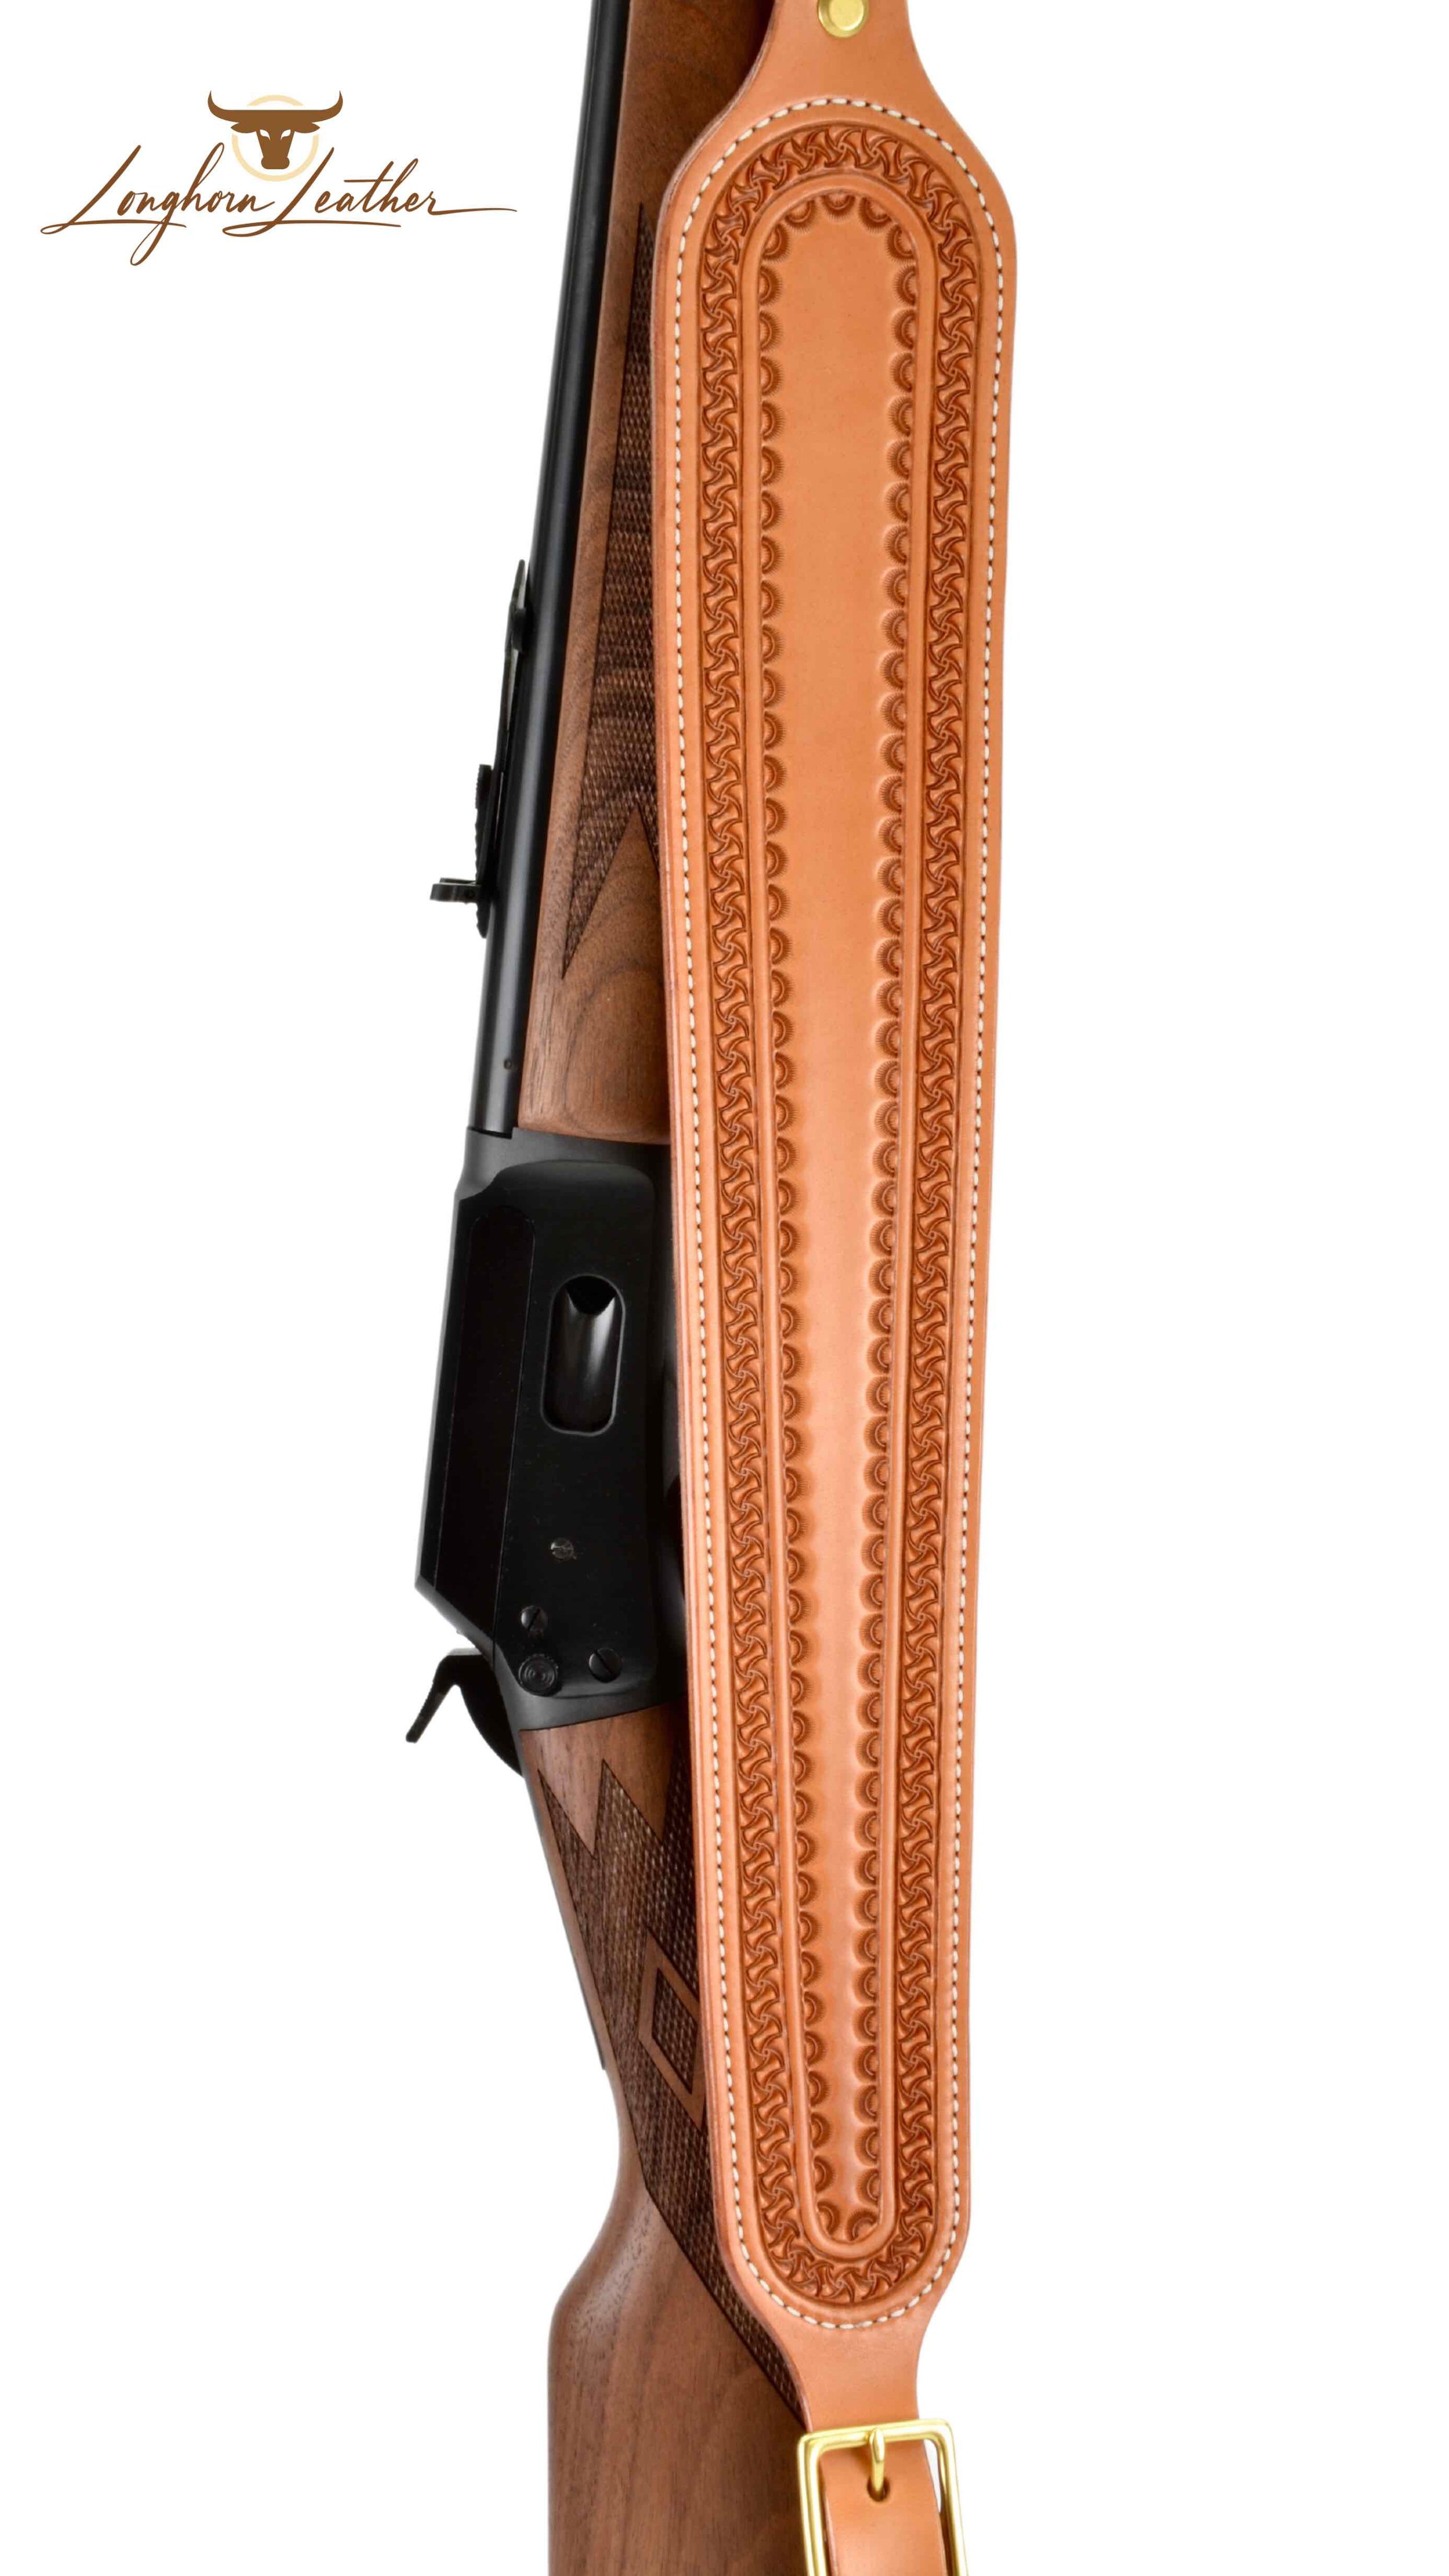 Custom leather rifle sling featuring the Kingman design.  Individually handcrafted at Longhorn Leather AZ